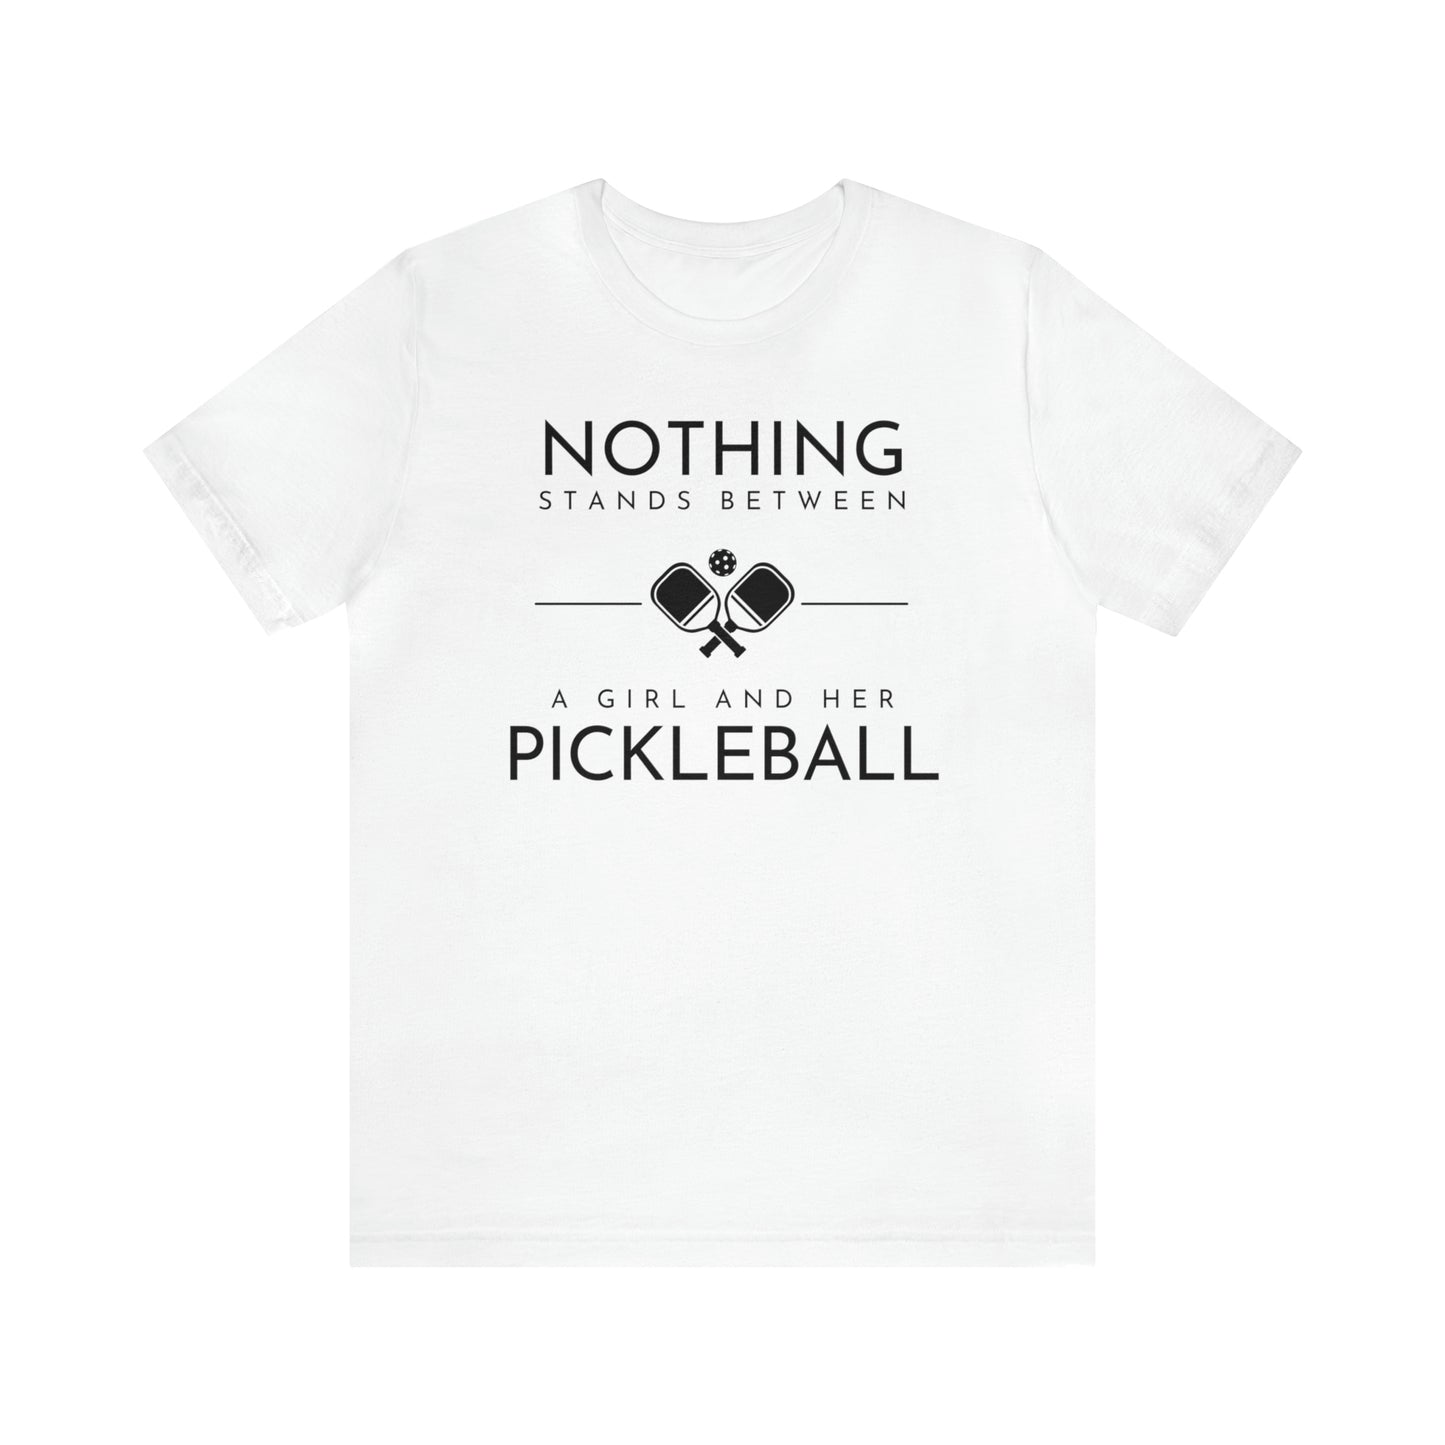 Nothing Stands Between A Girl and Her Pickleball